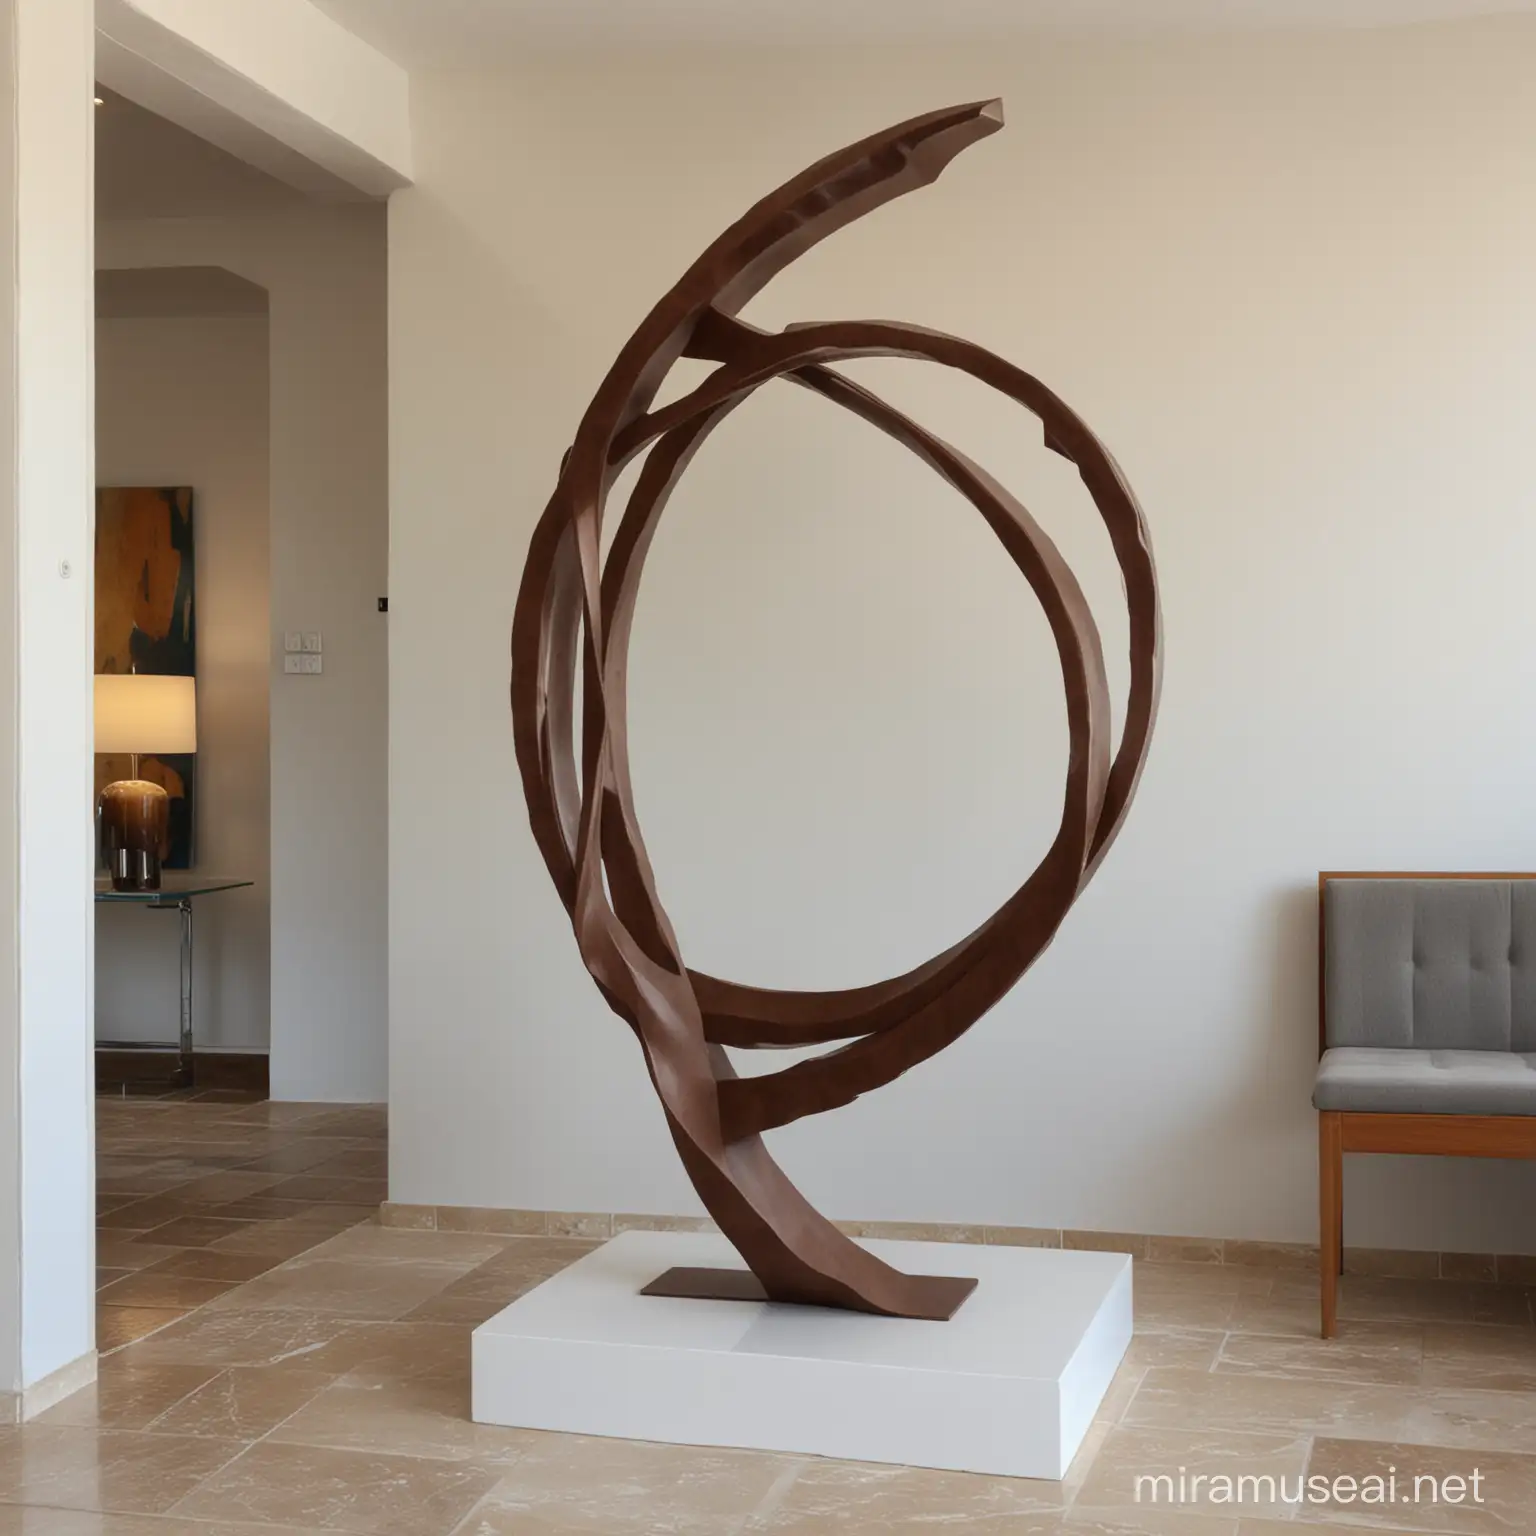 mediteranian style prototype sculpture for interior space
